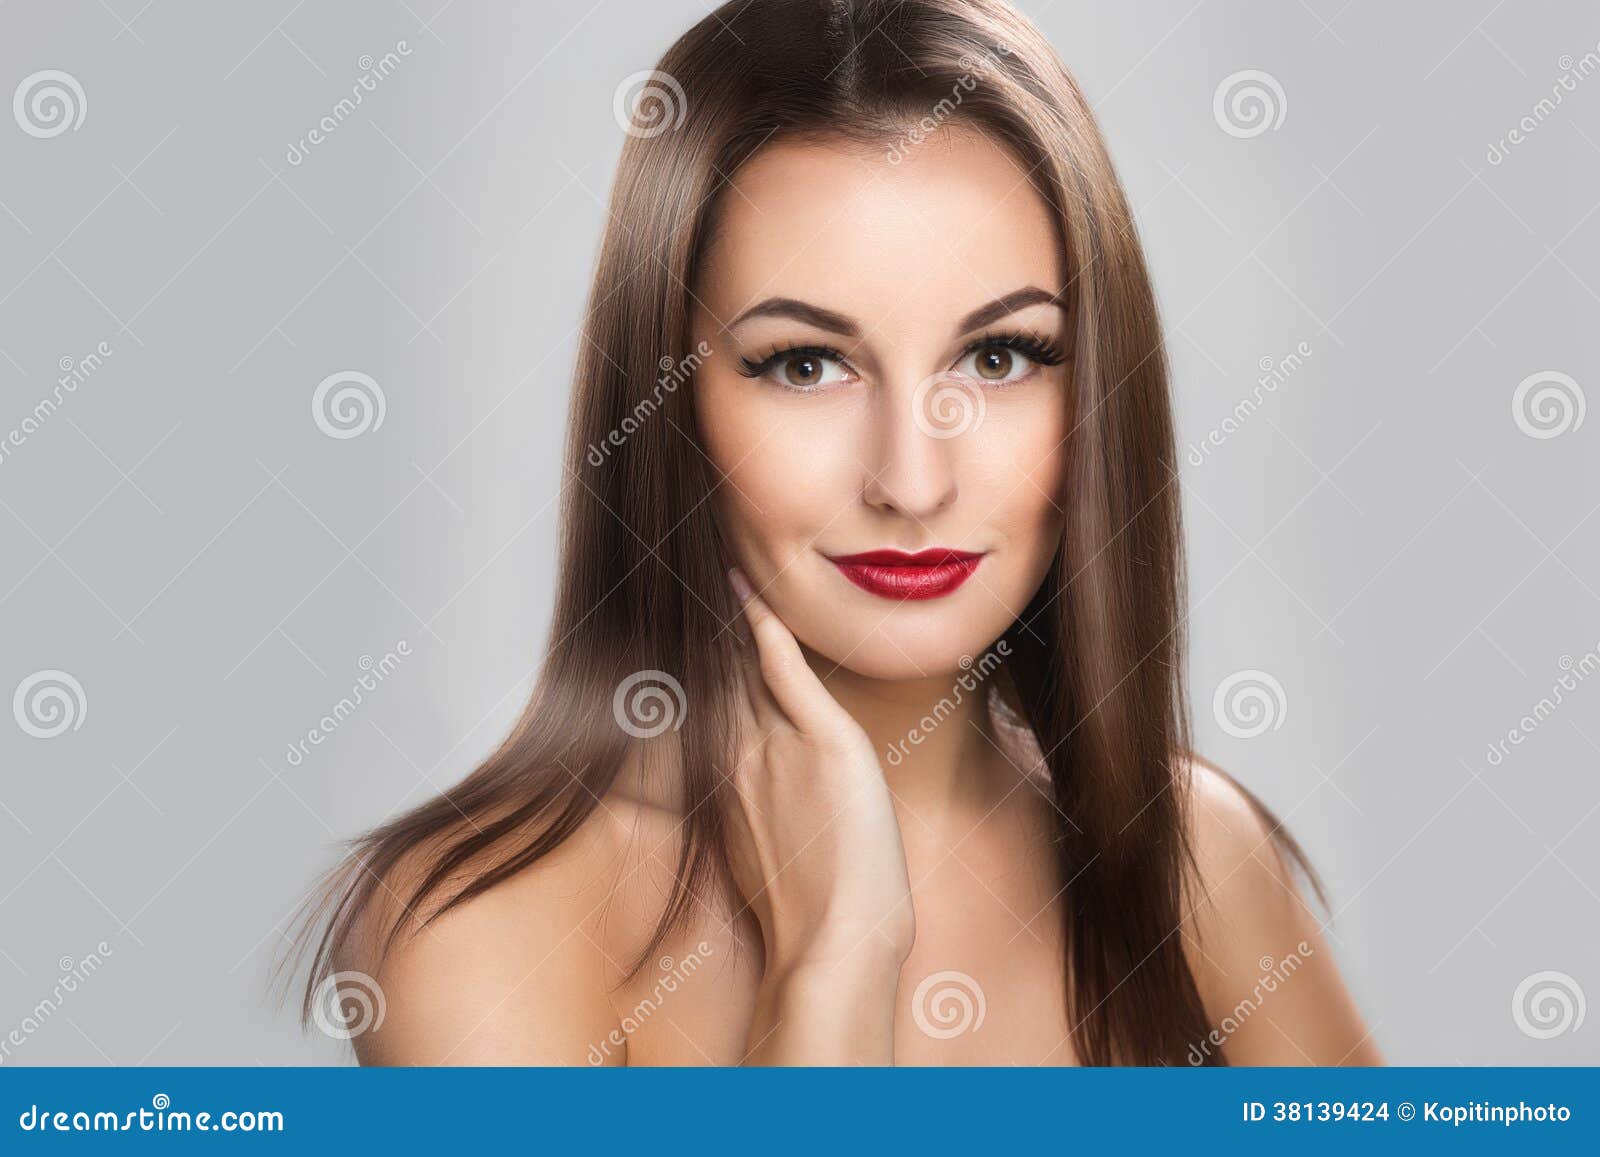 Beautiful Woman with Long Straight Brown Hair Stock Photo - Image of ...